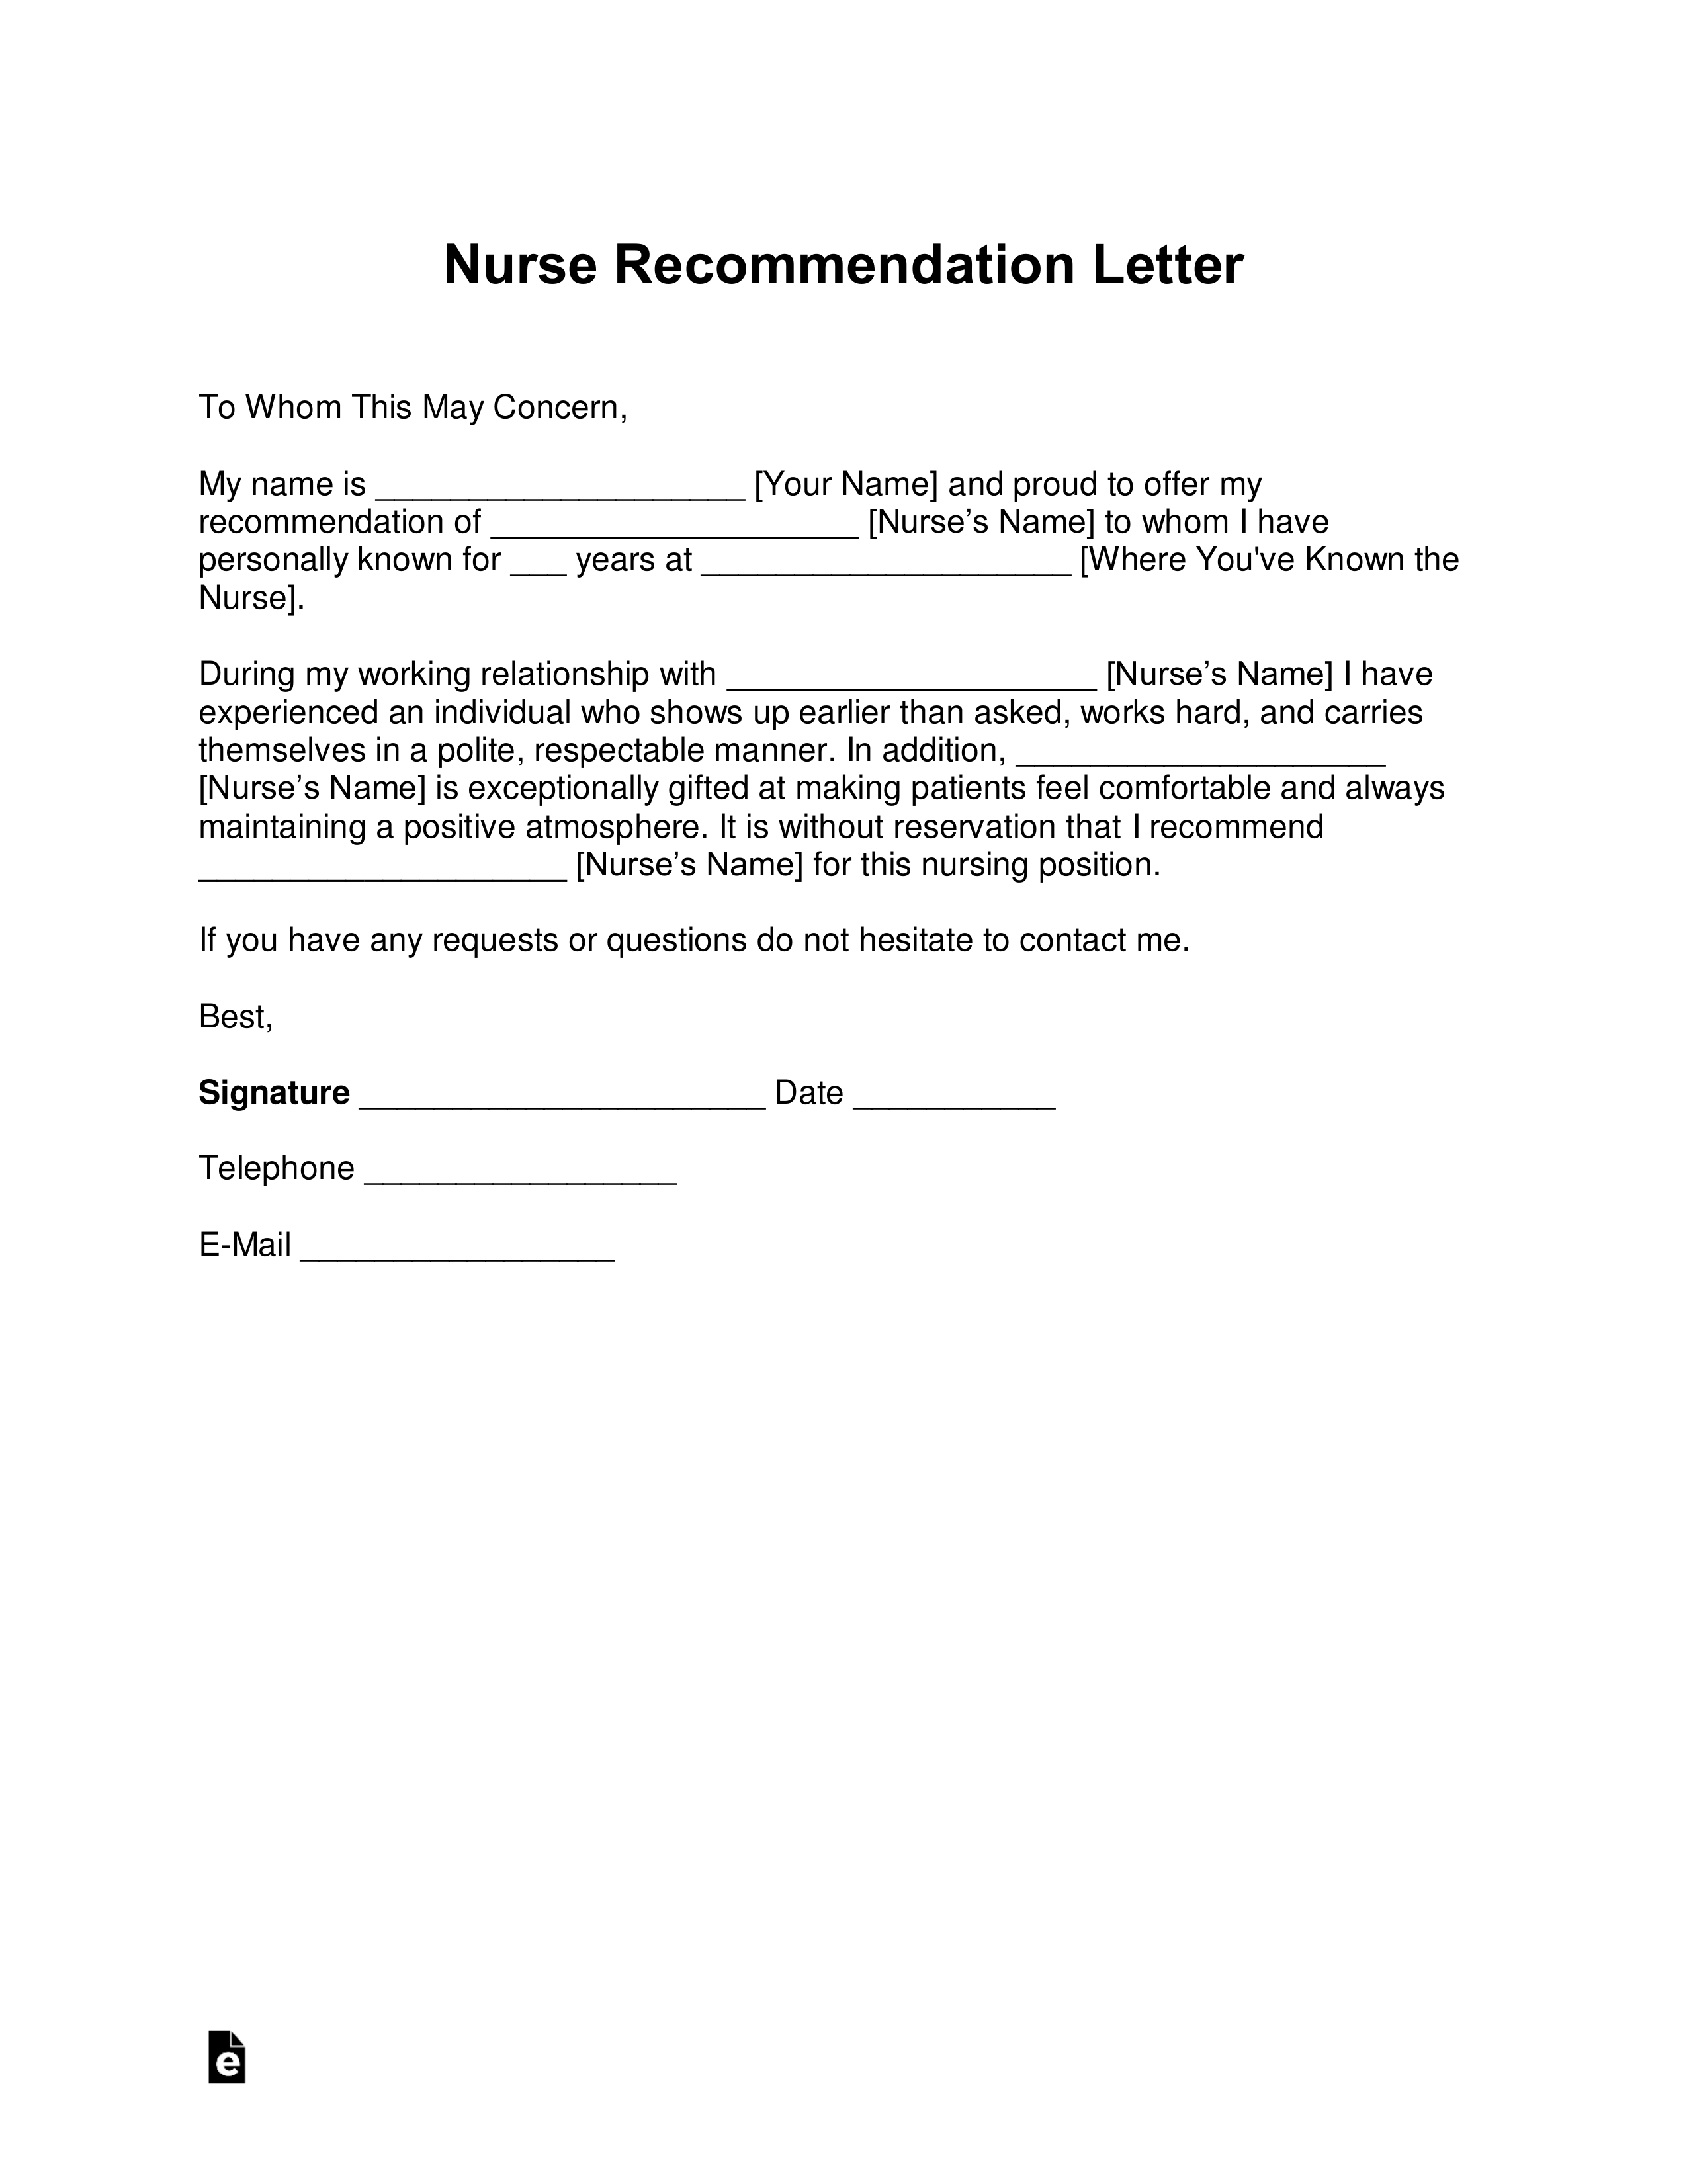 Letter Of Recommendation For Coworker Examples from eforms.com